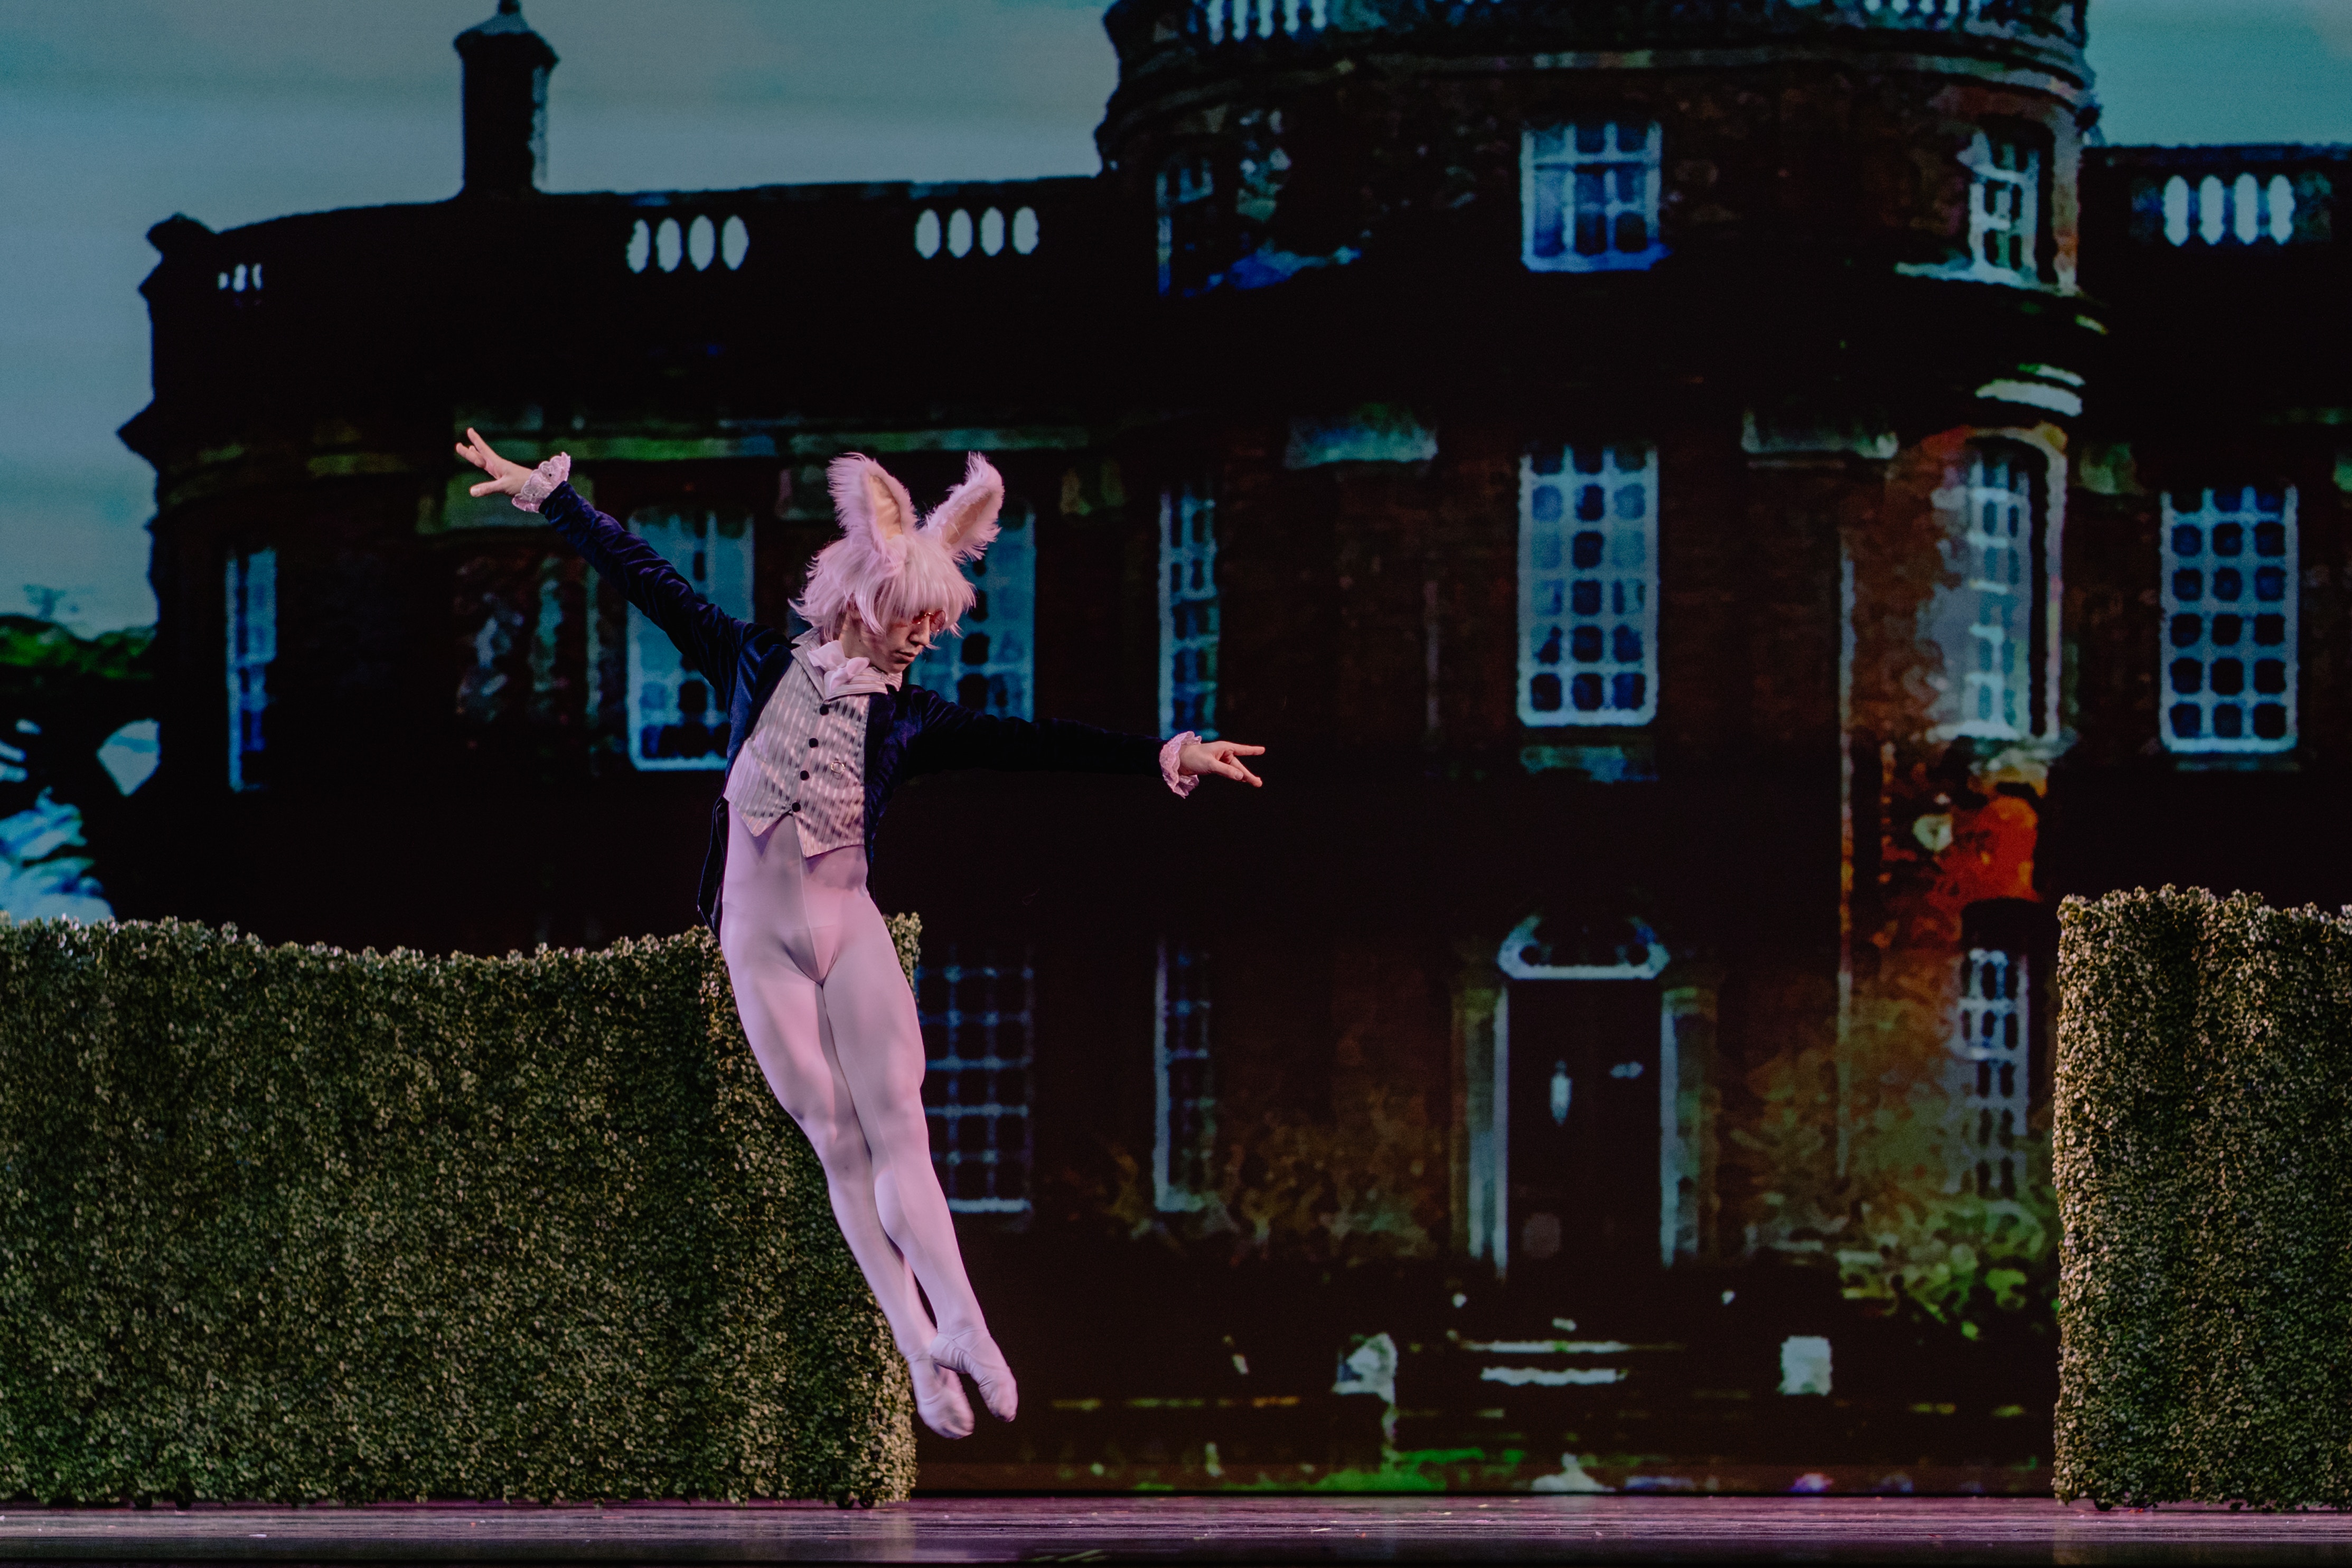 Male ballet dancer in a pink rabbit costume and a coat, leaping in the street.